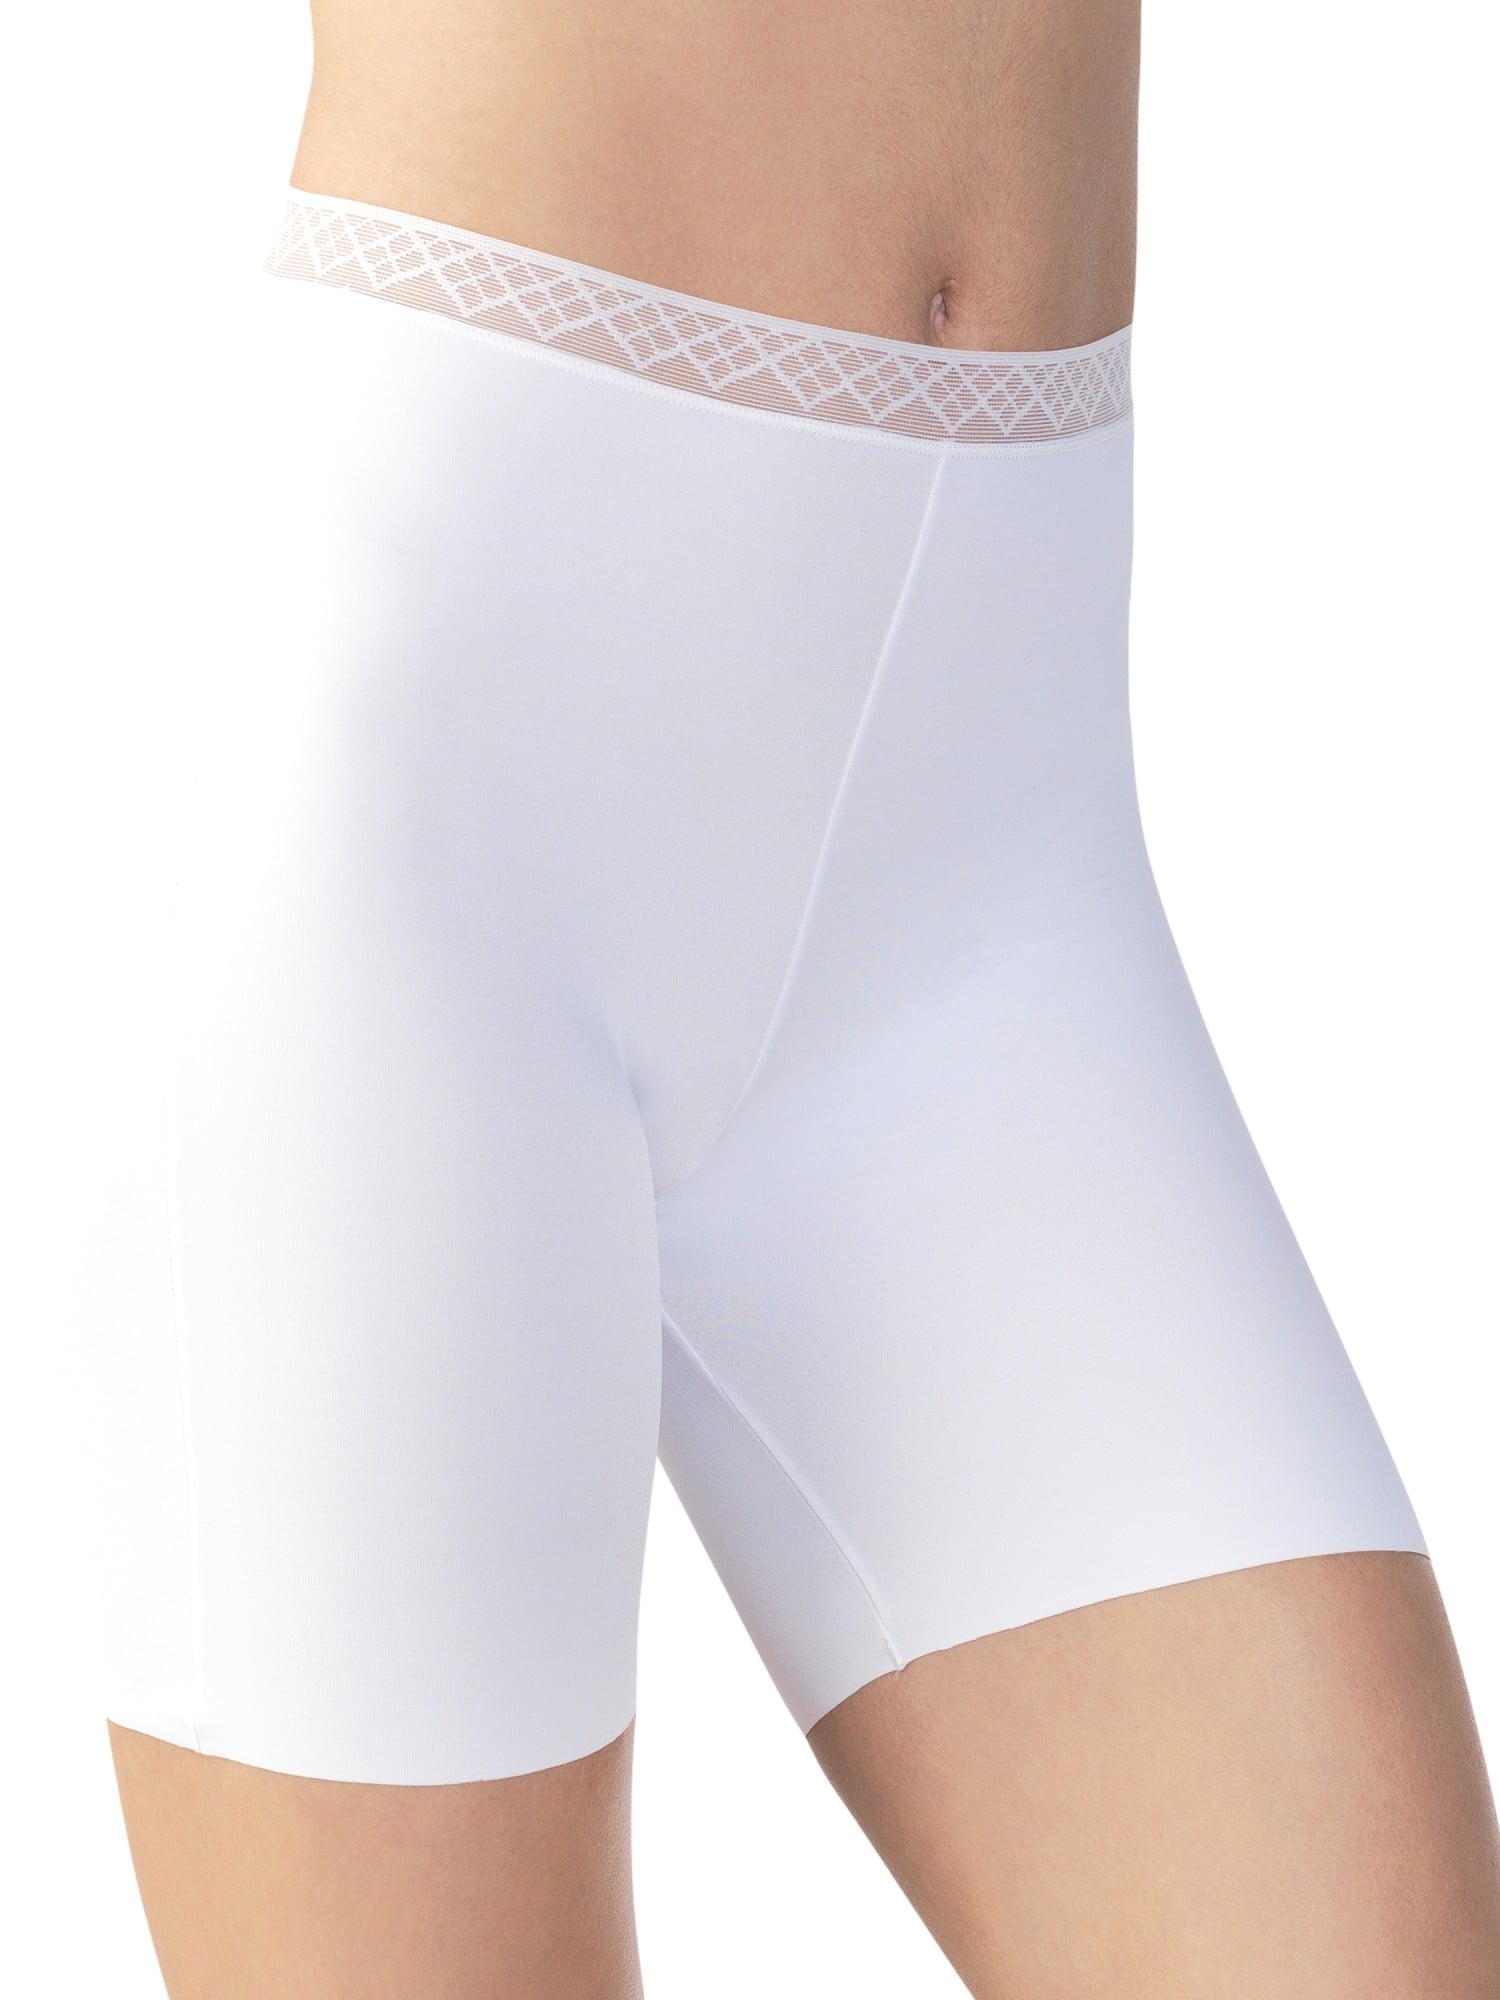 Vassarette Womens Invisibly Smooth Slip Short Panty 12385 : :  Clothing, Shoes & Accessories